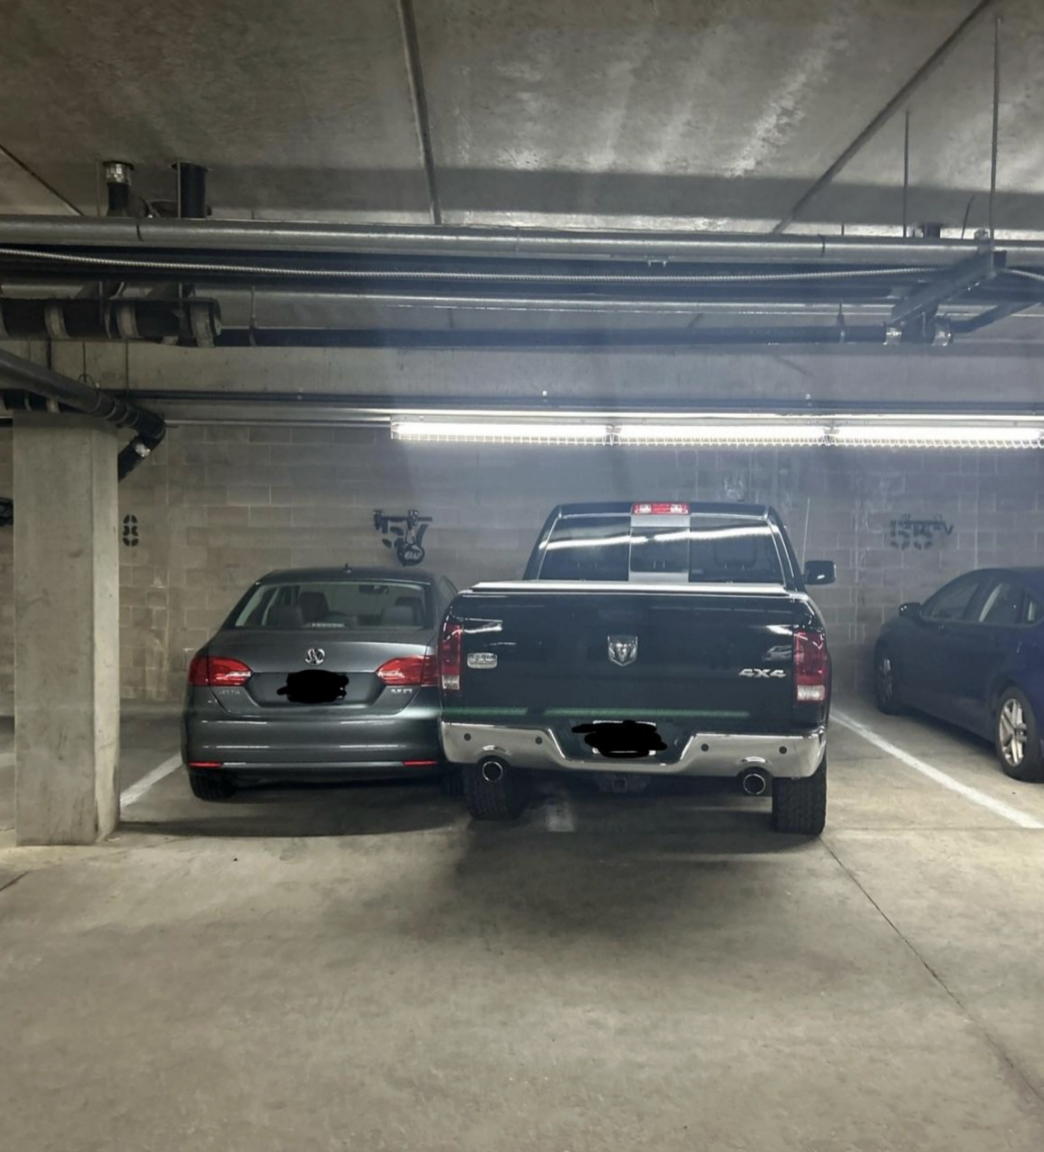 truck parked diagonally in two spots and a car in their parking spot right next to it